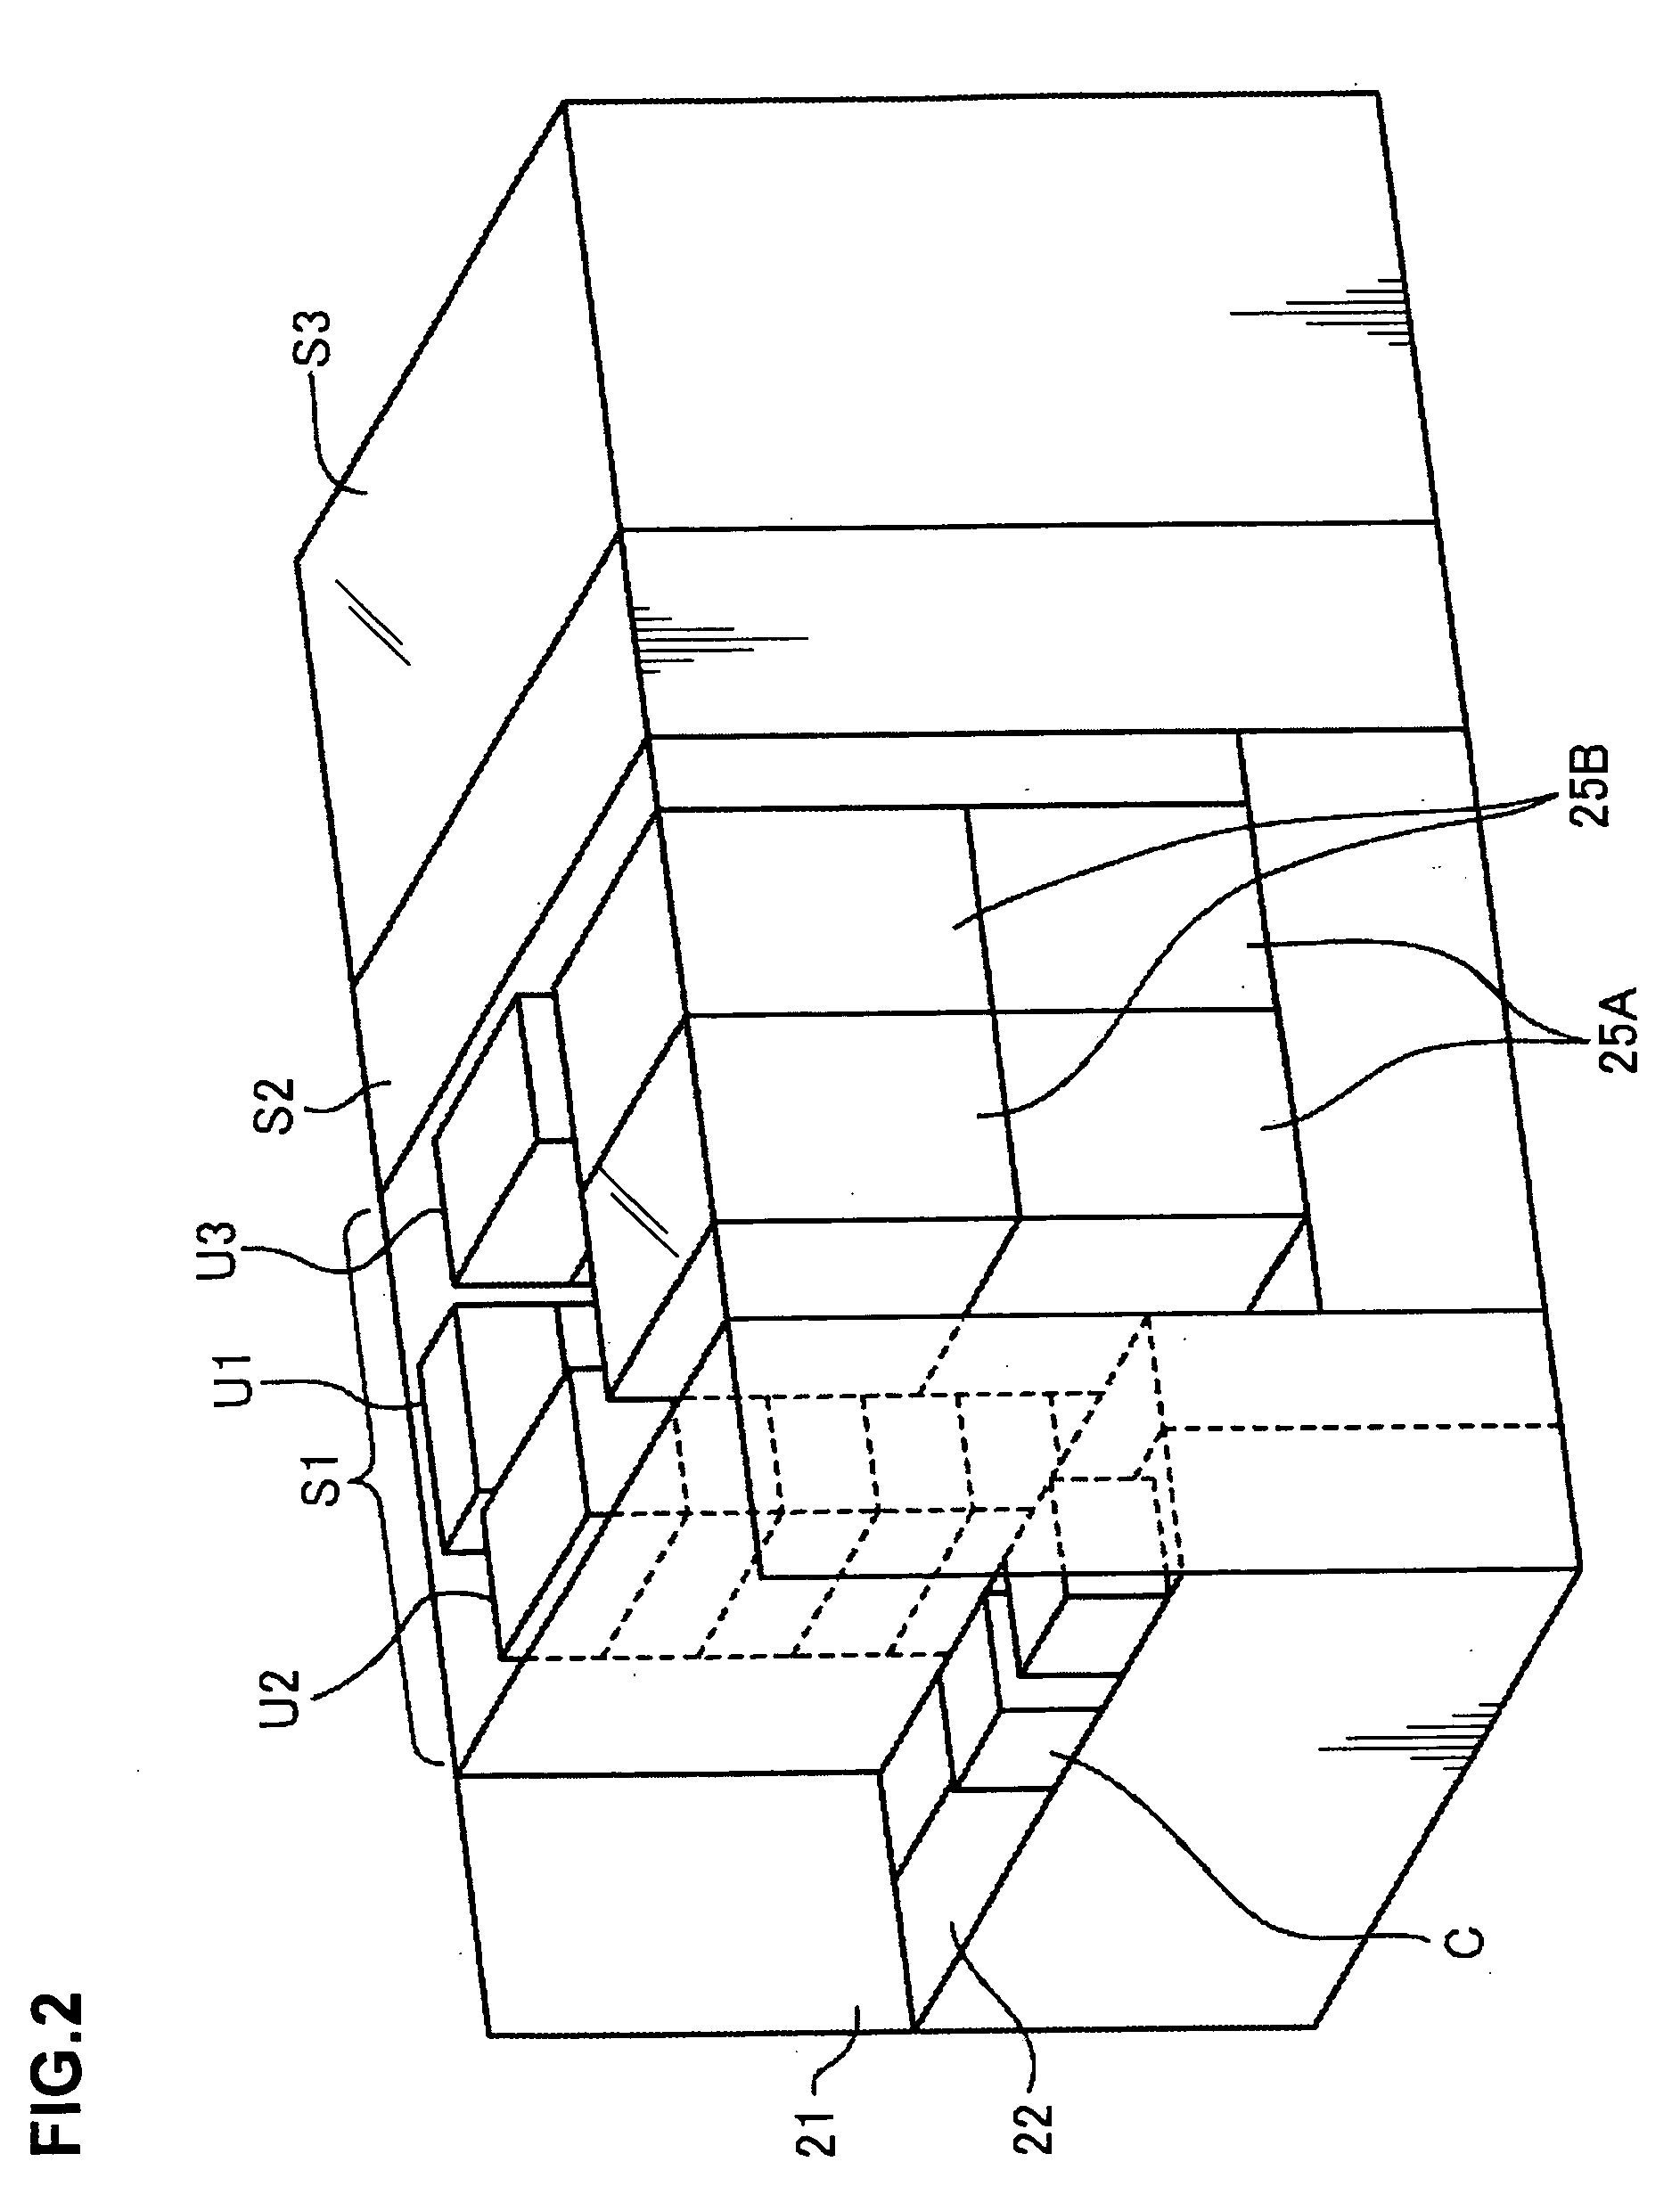 Reduced-pressure drying unit and coating film forming method